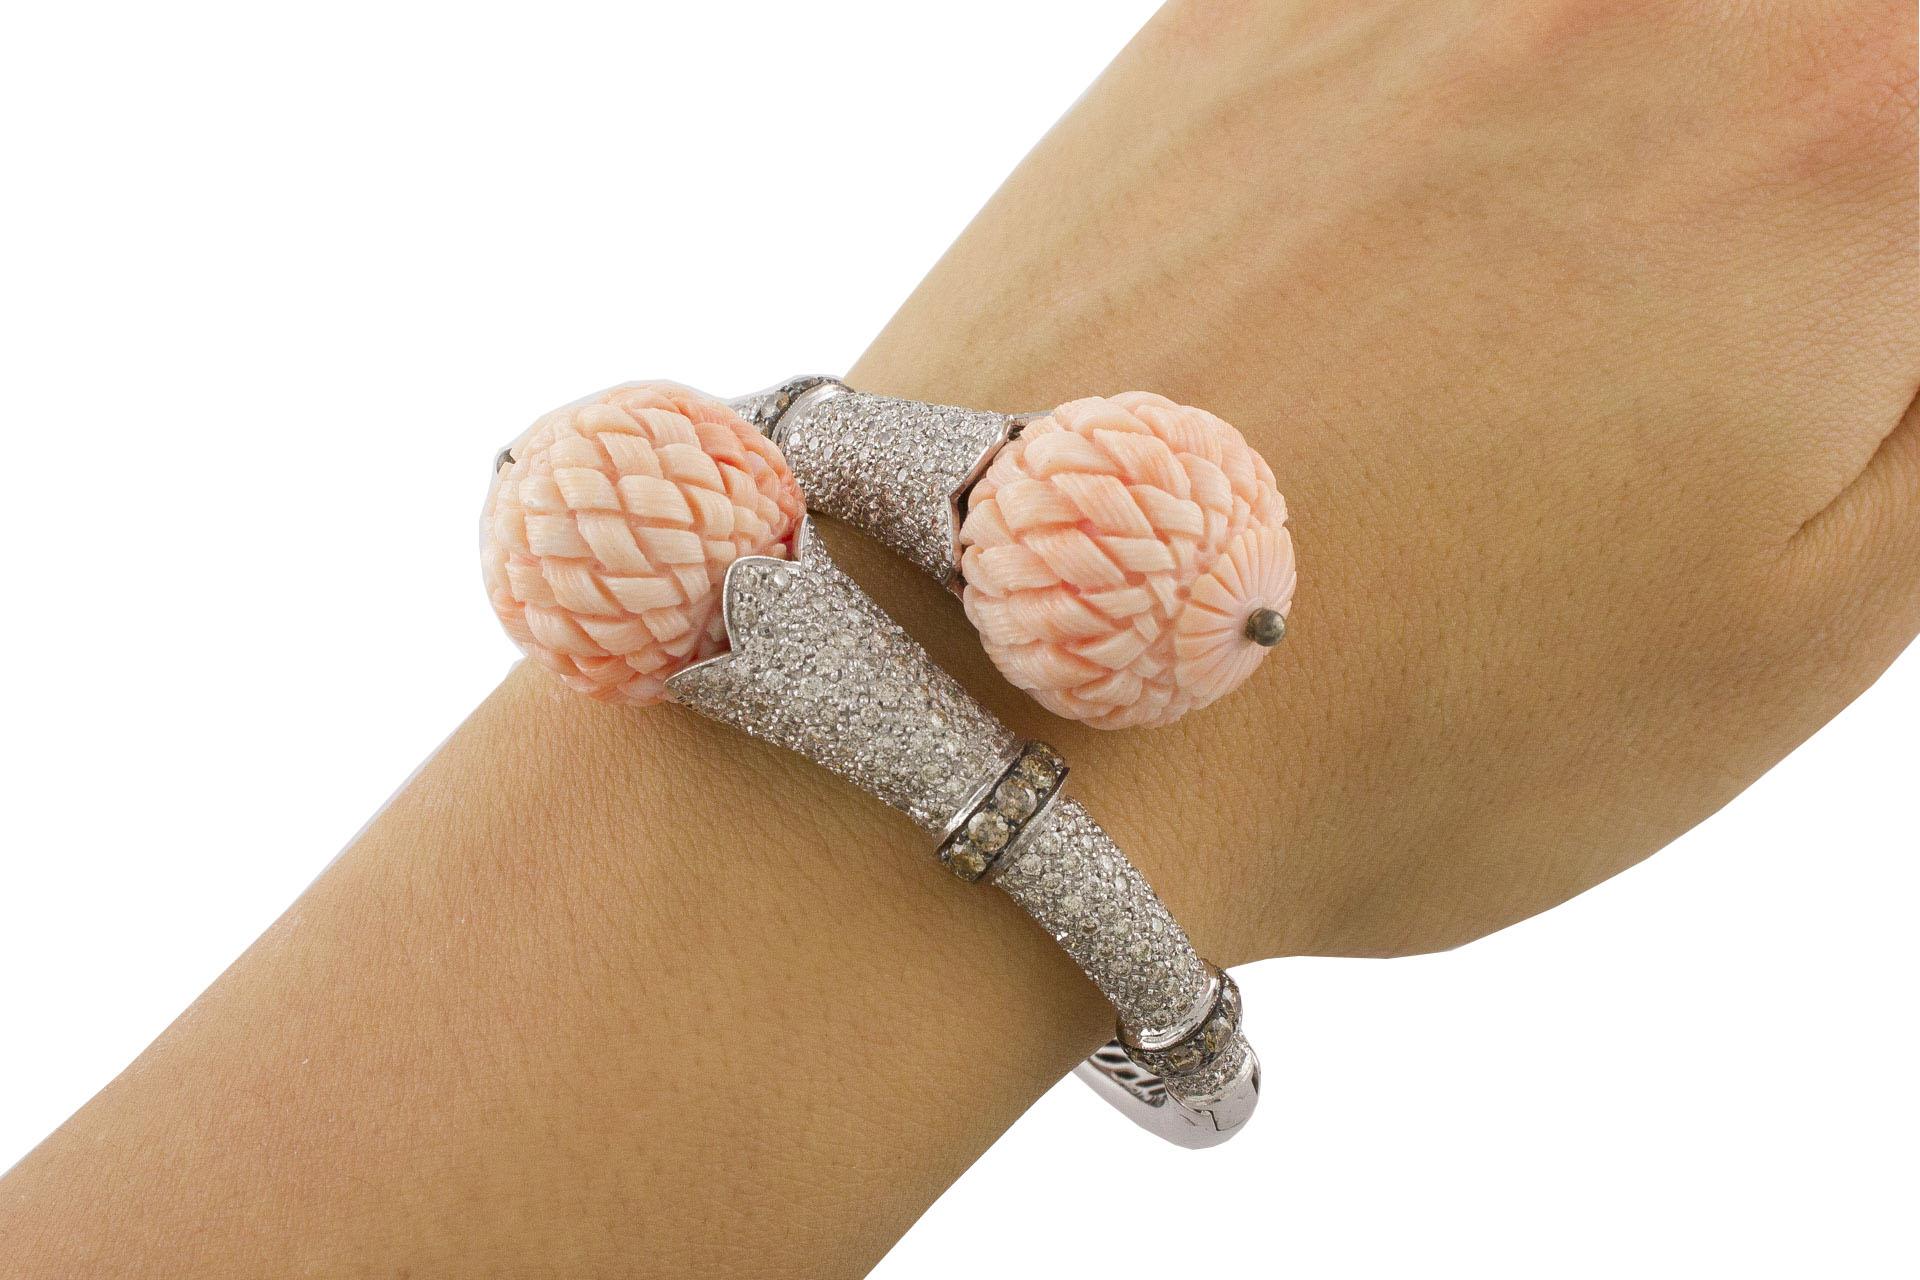 White and Light Brown Diamonds, Engraved Pink Corals Spheres White Gold Bracelet 1